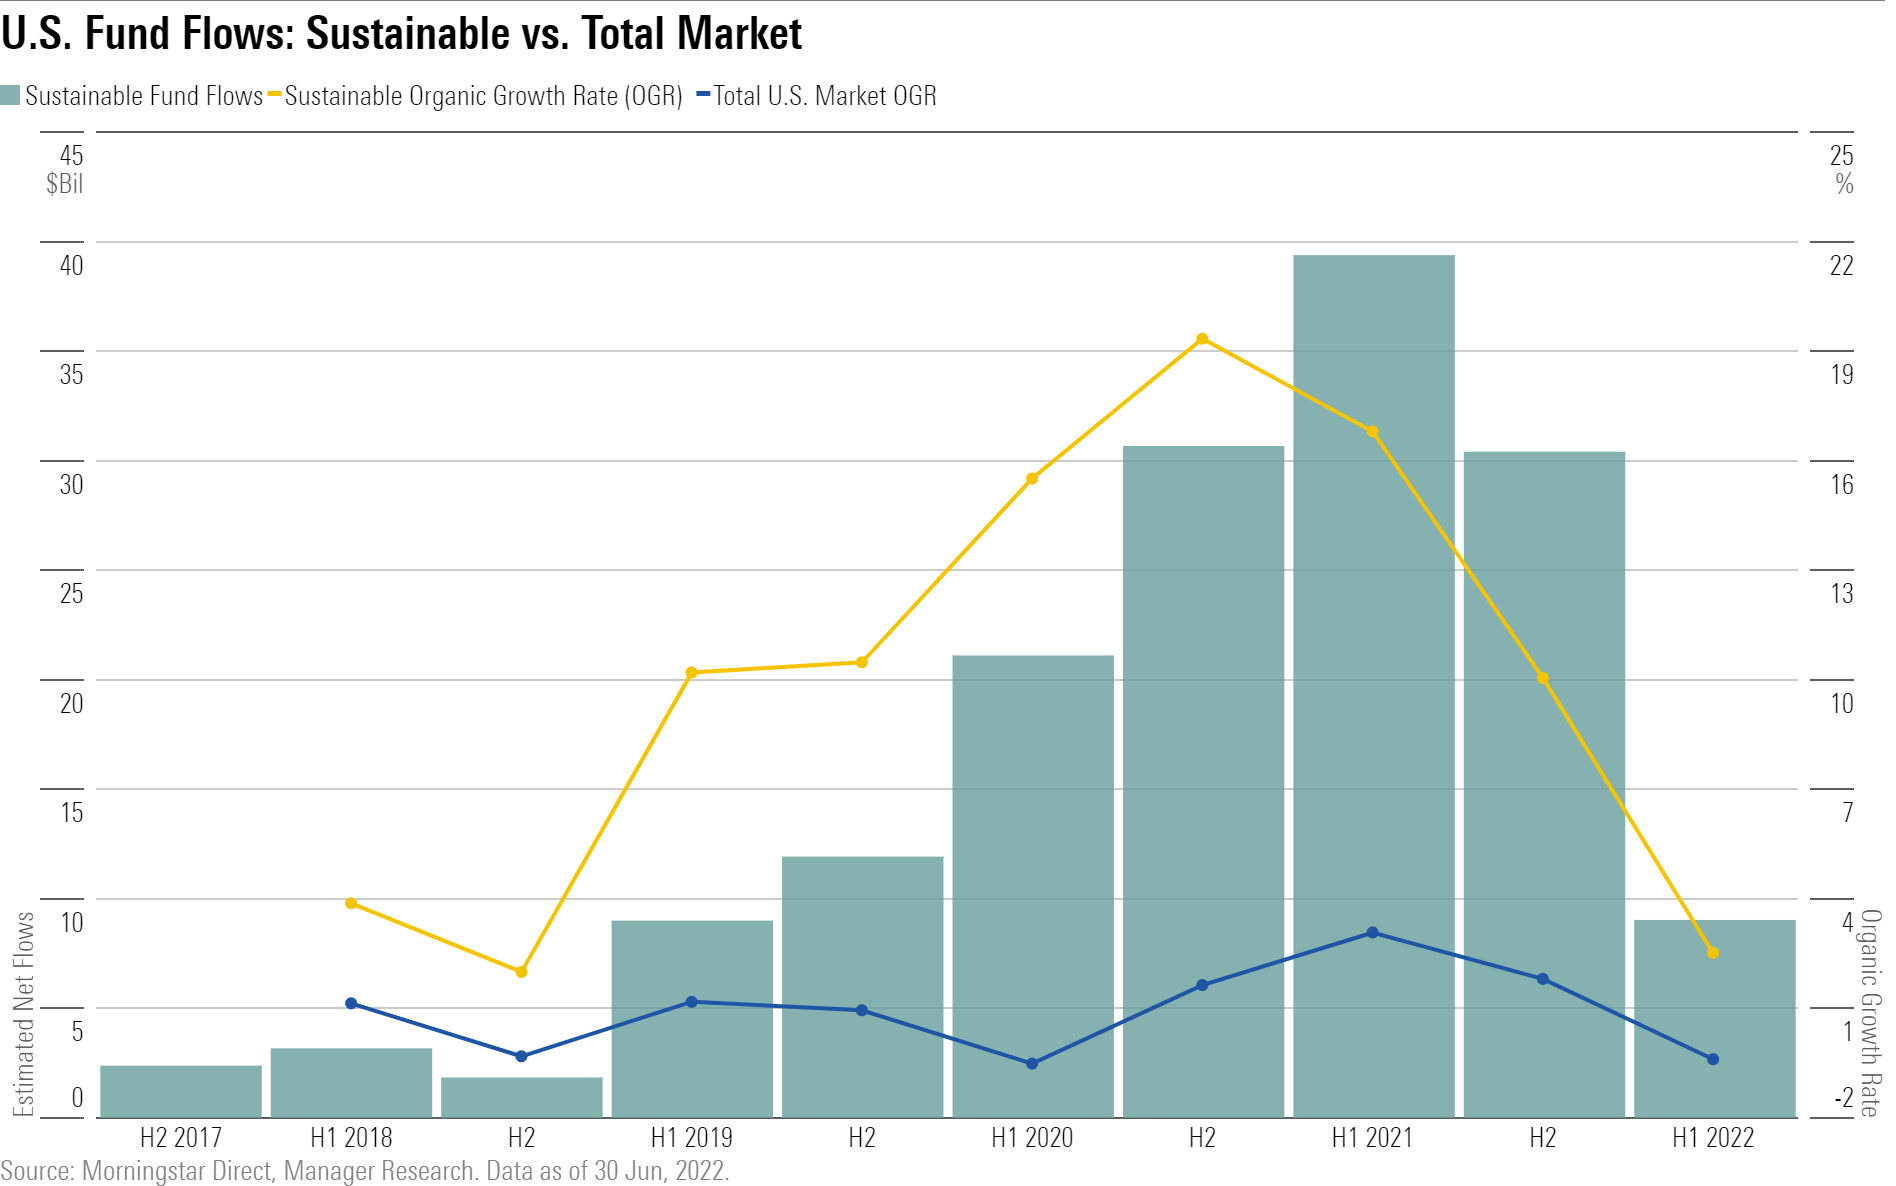 2Q22 Sustainable Flows vs. Total Market. The total market had relatively greater outflows than sustainable funds.